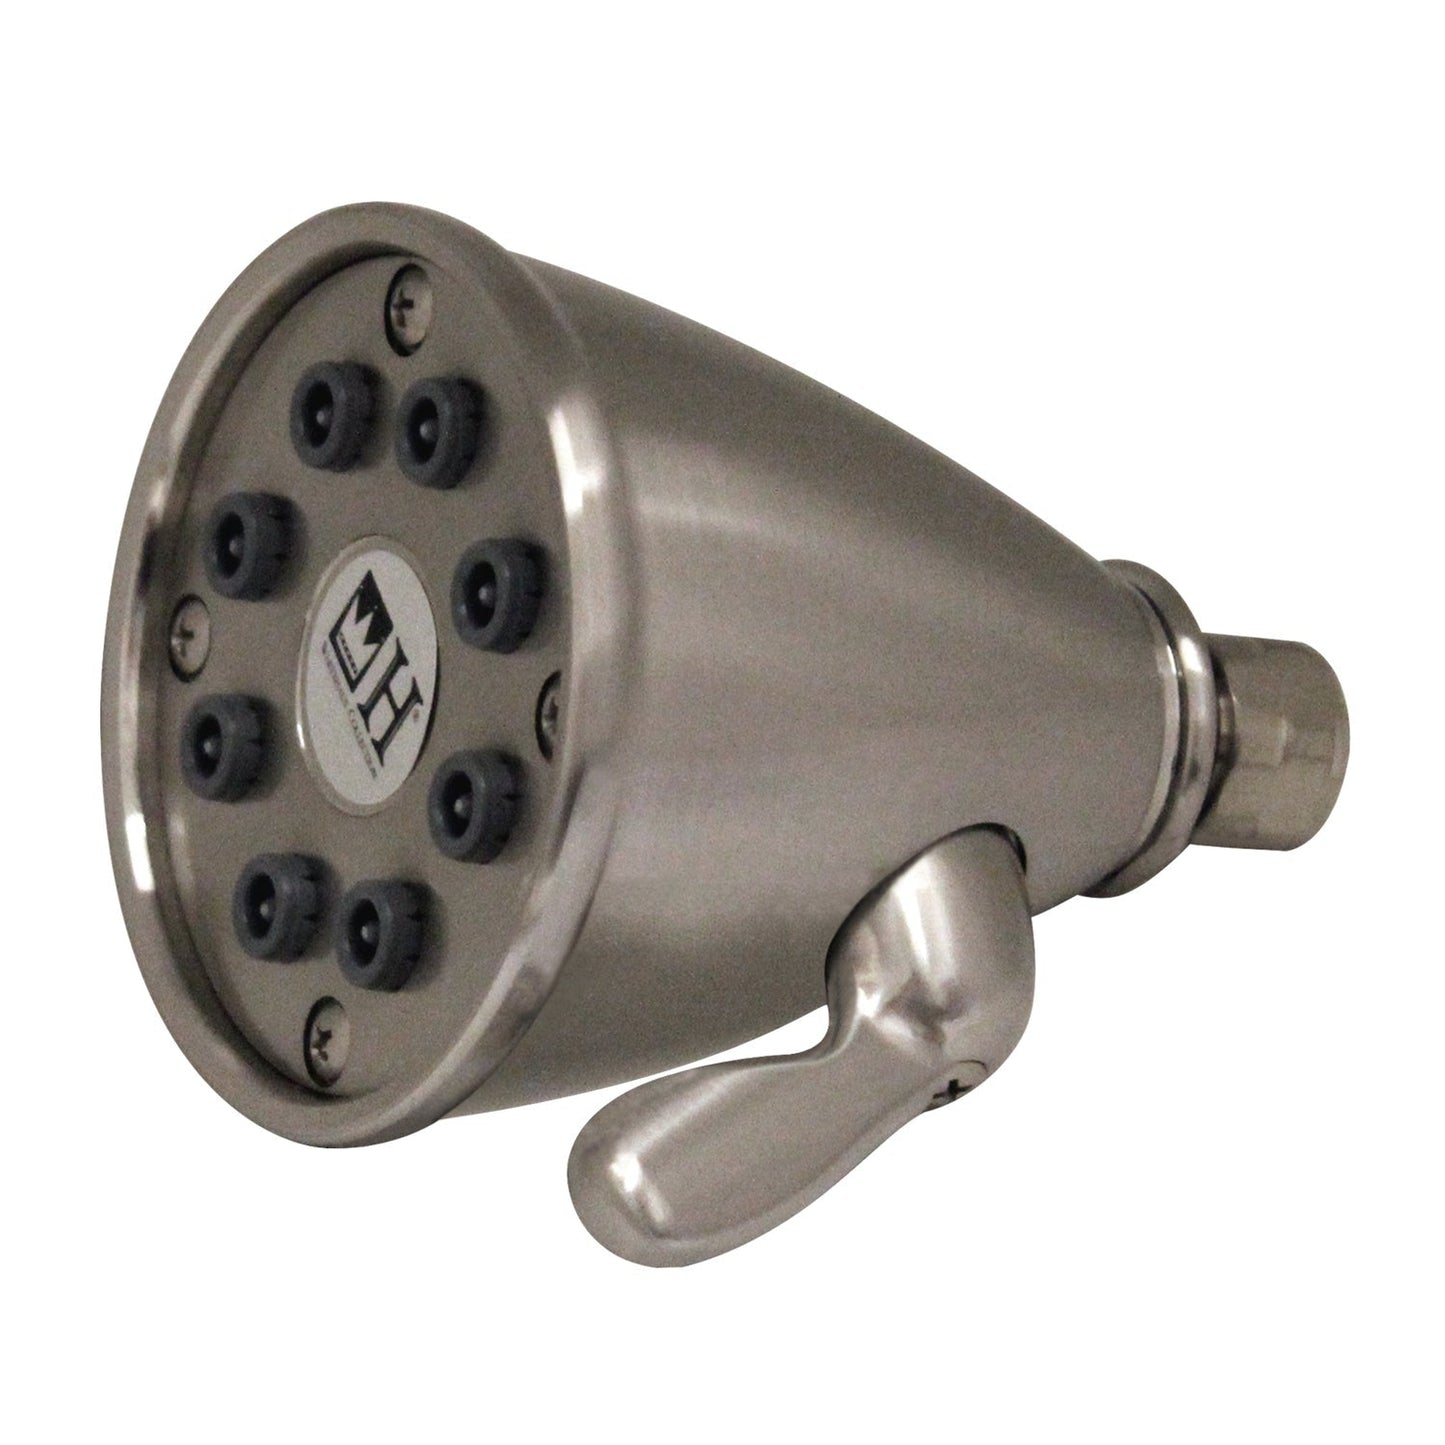 Whitehaus Showerhaus WH139-C Polished Chrome Round Showerhead With 8 Spray Jets - Solid Brass Construction With Adjustable Ball Joint